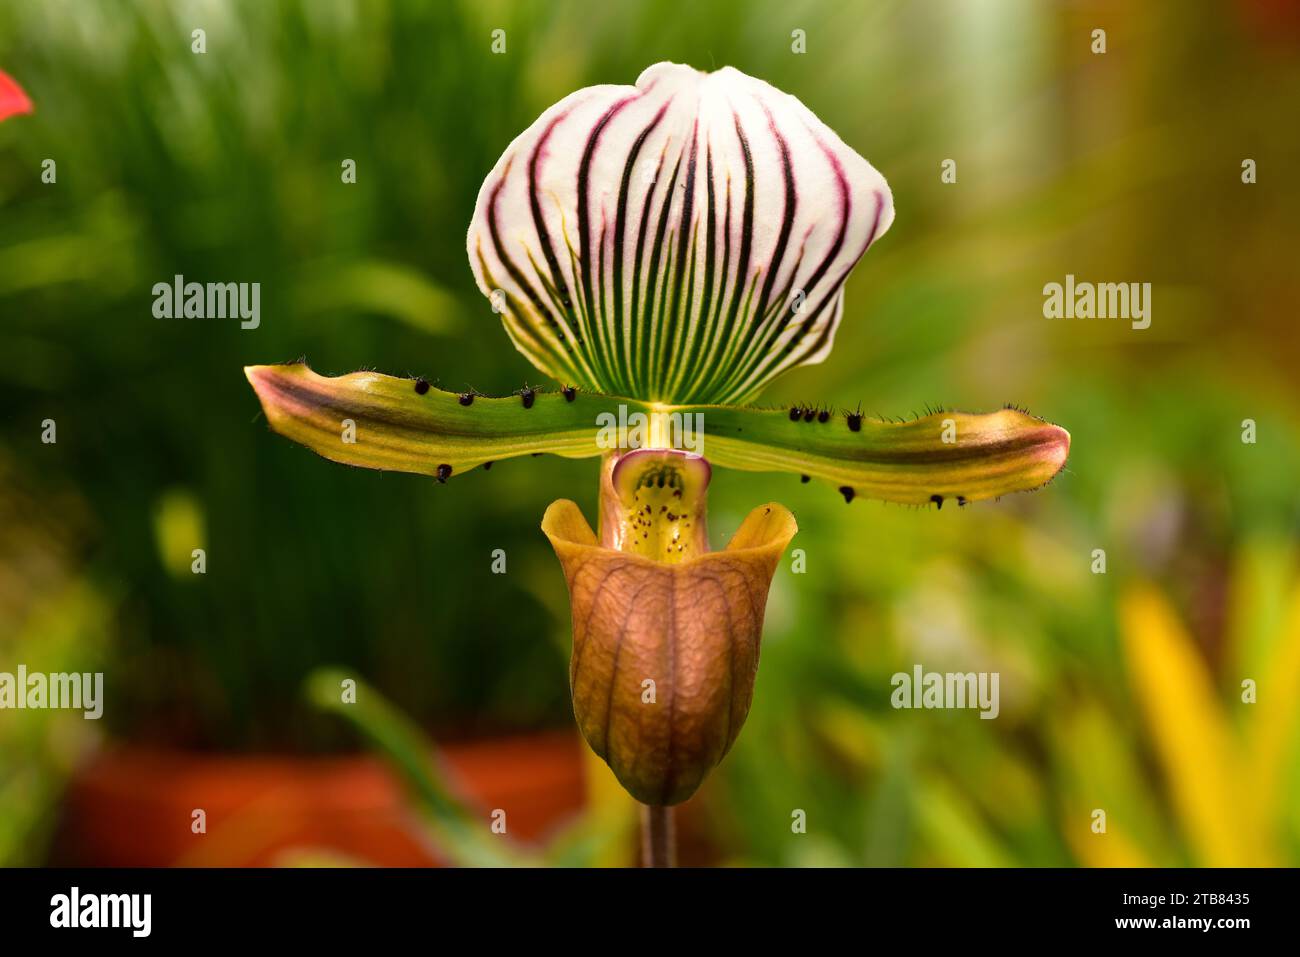 Paphiopedilum lawrenceanum is an ornamental orchid endemic to Borneo. Stock Photo